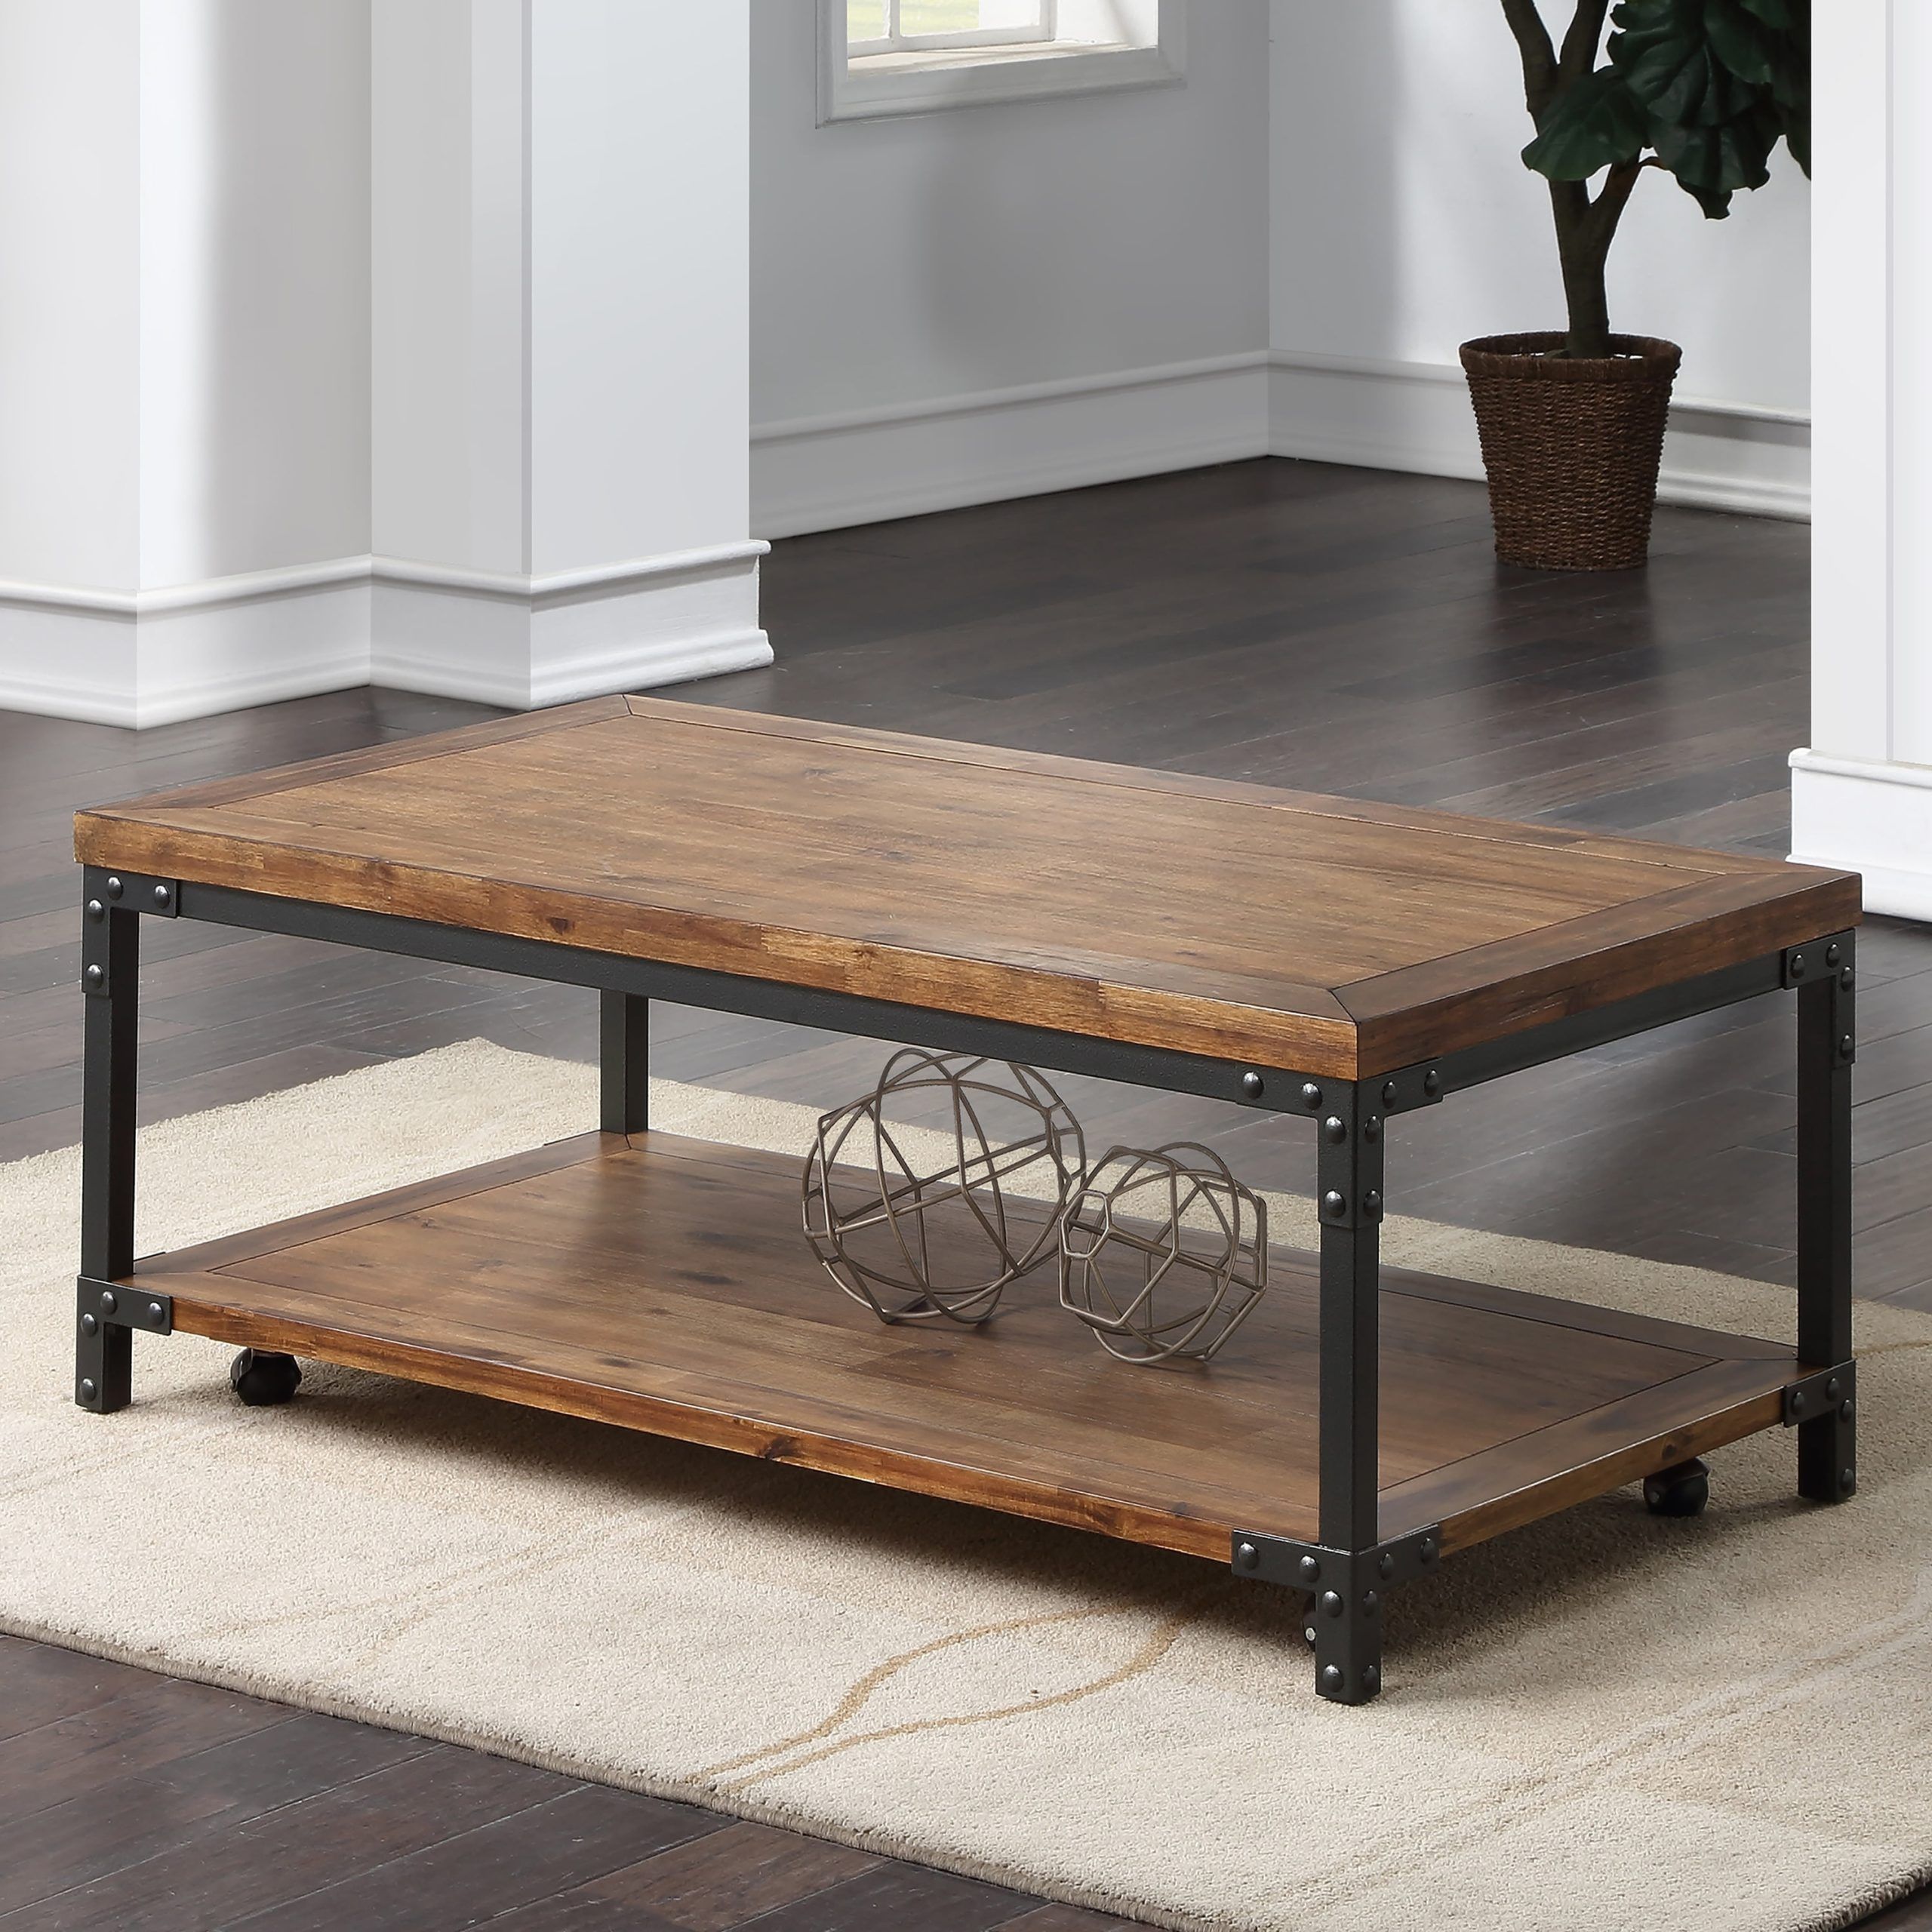 Famous Coffee Tables With Casters Within Greyson Living Leyburn Industrial Wood And Metal Coffee Table With Casters – Walmart (View 9 of 10)